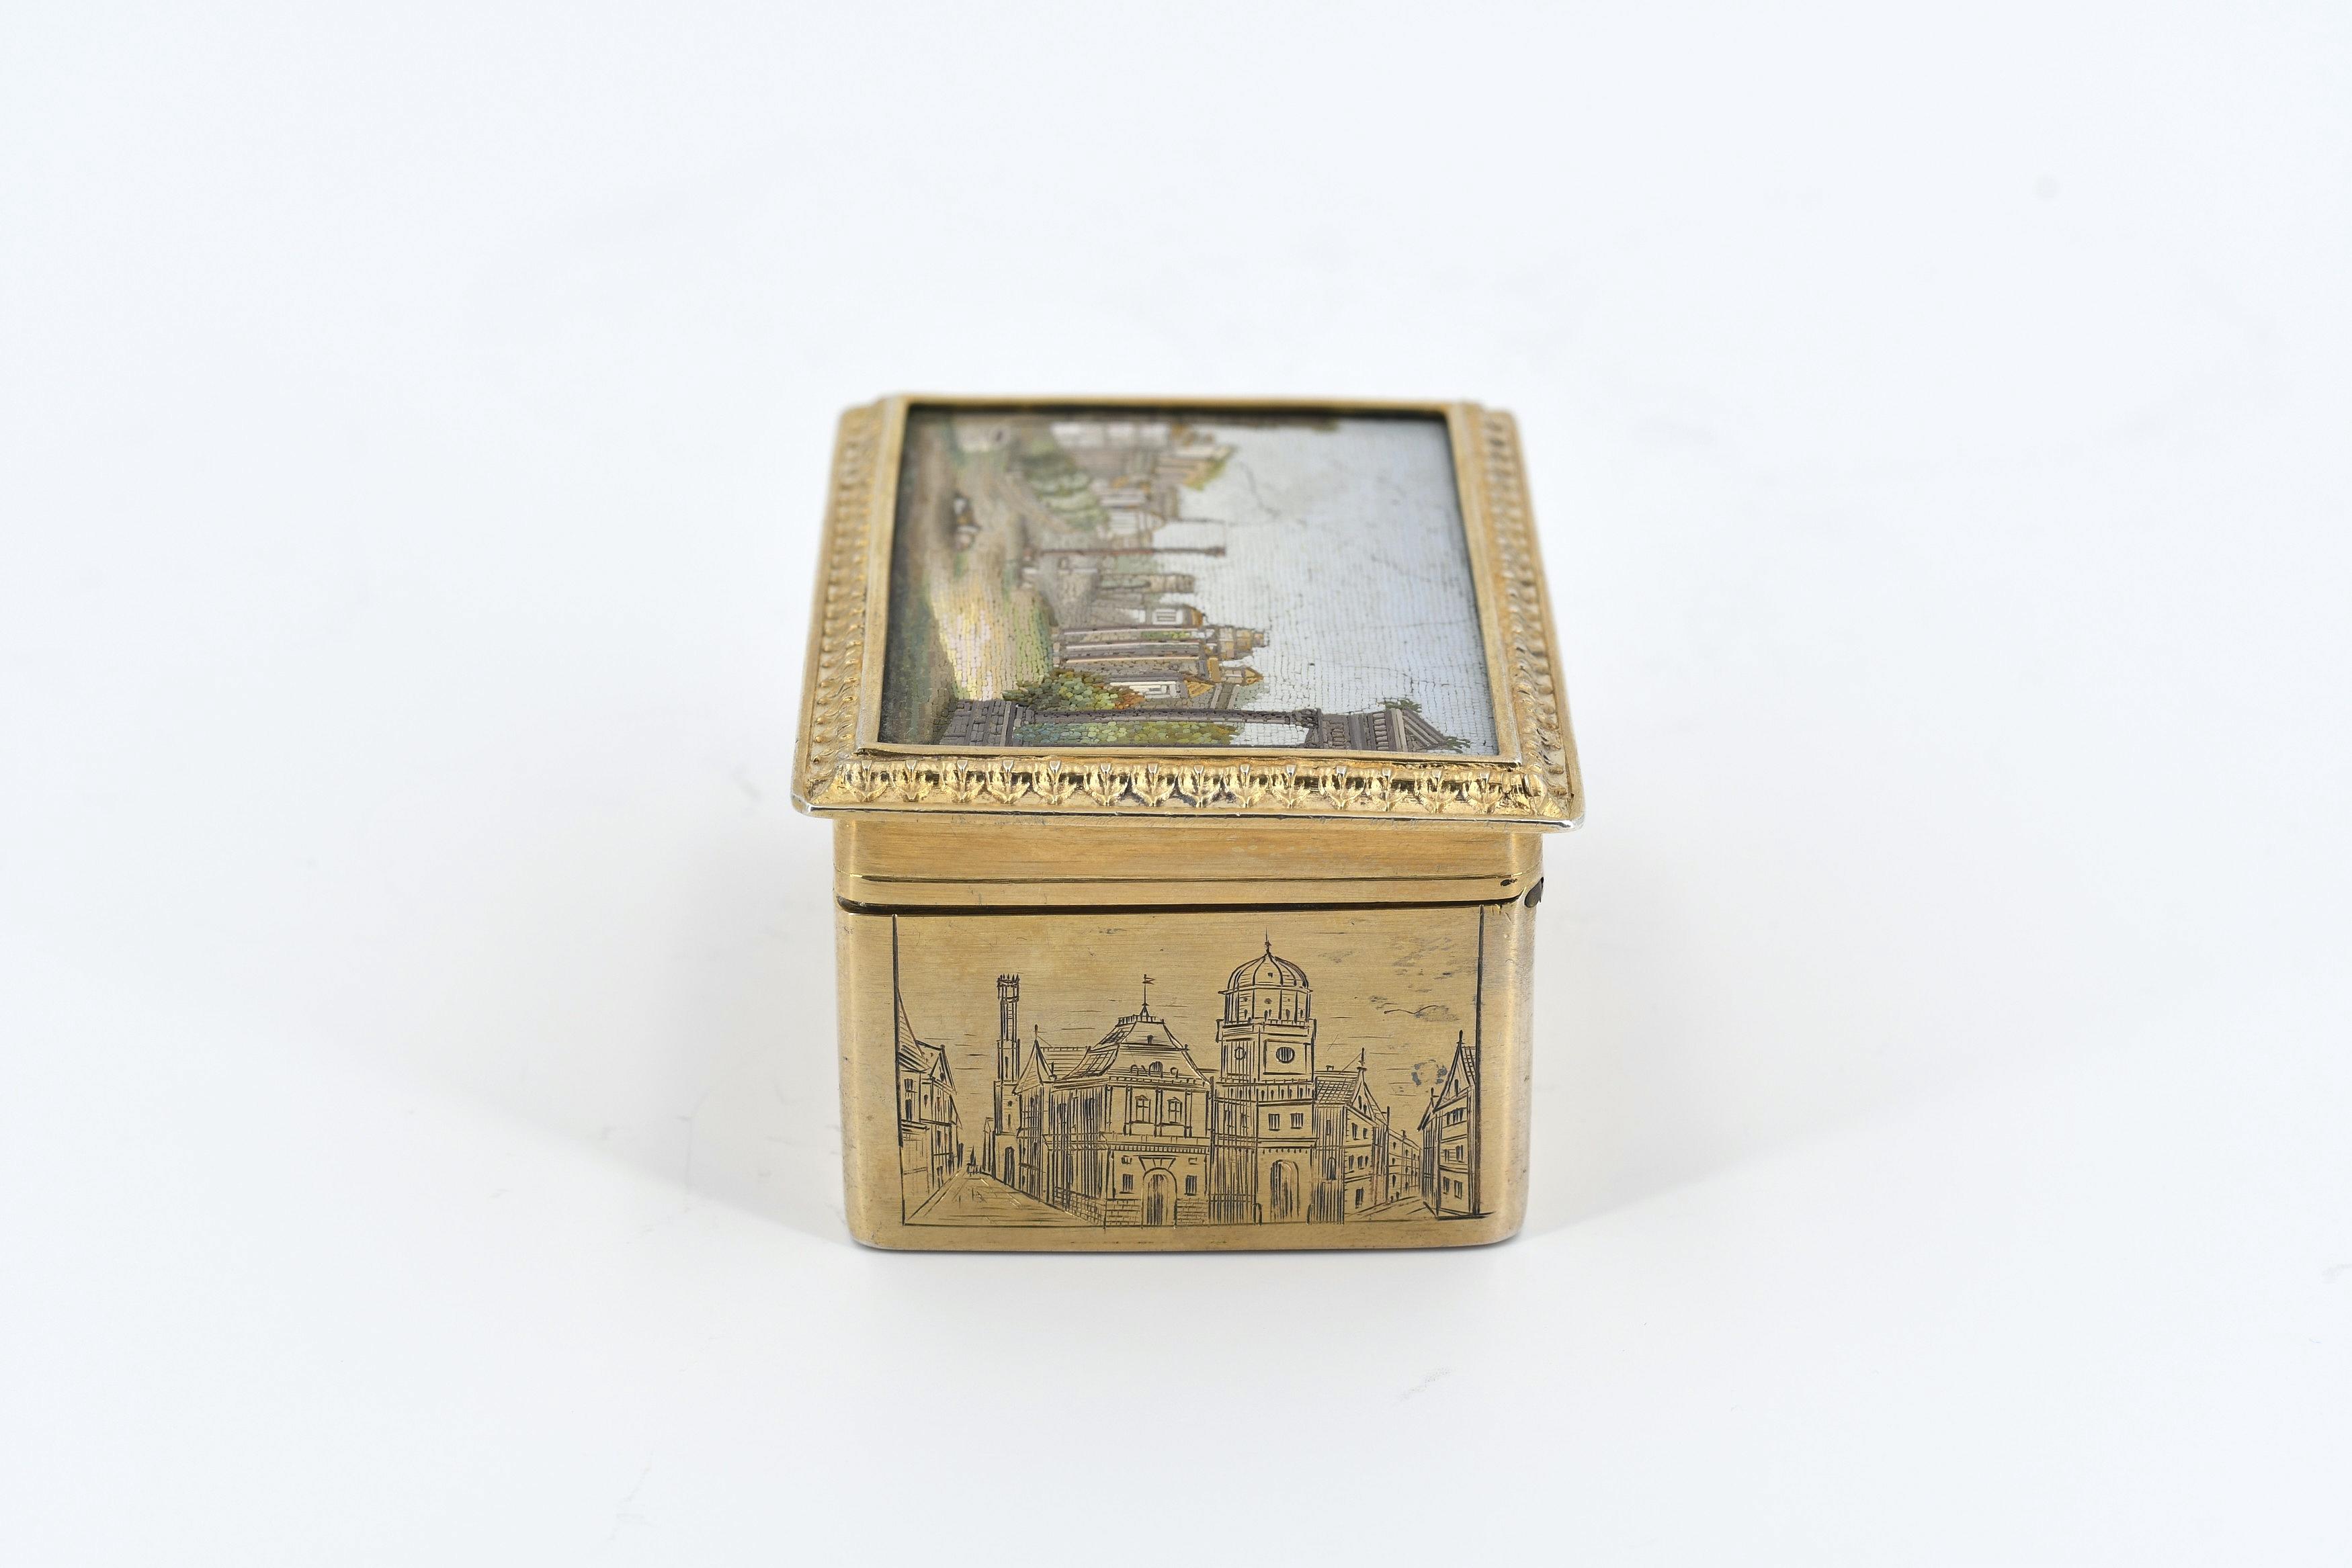 Two exquisite gilt silver and glass snuffboxes with cityscapes of rome in micro mosaic - Image 4 of 14